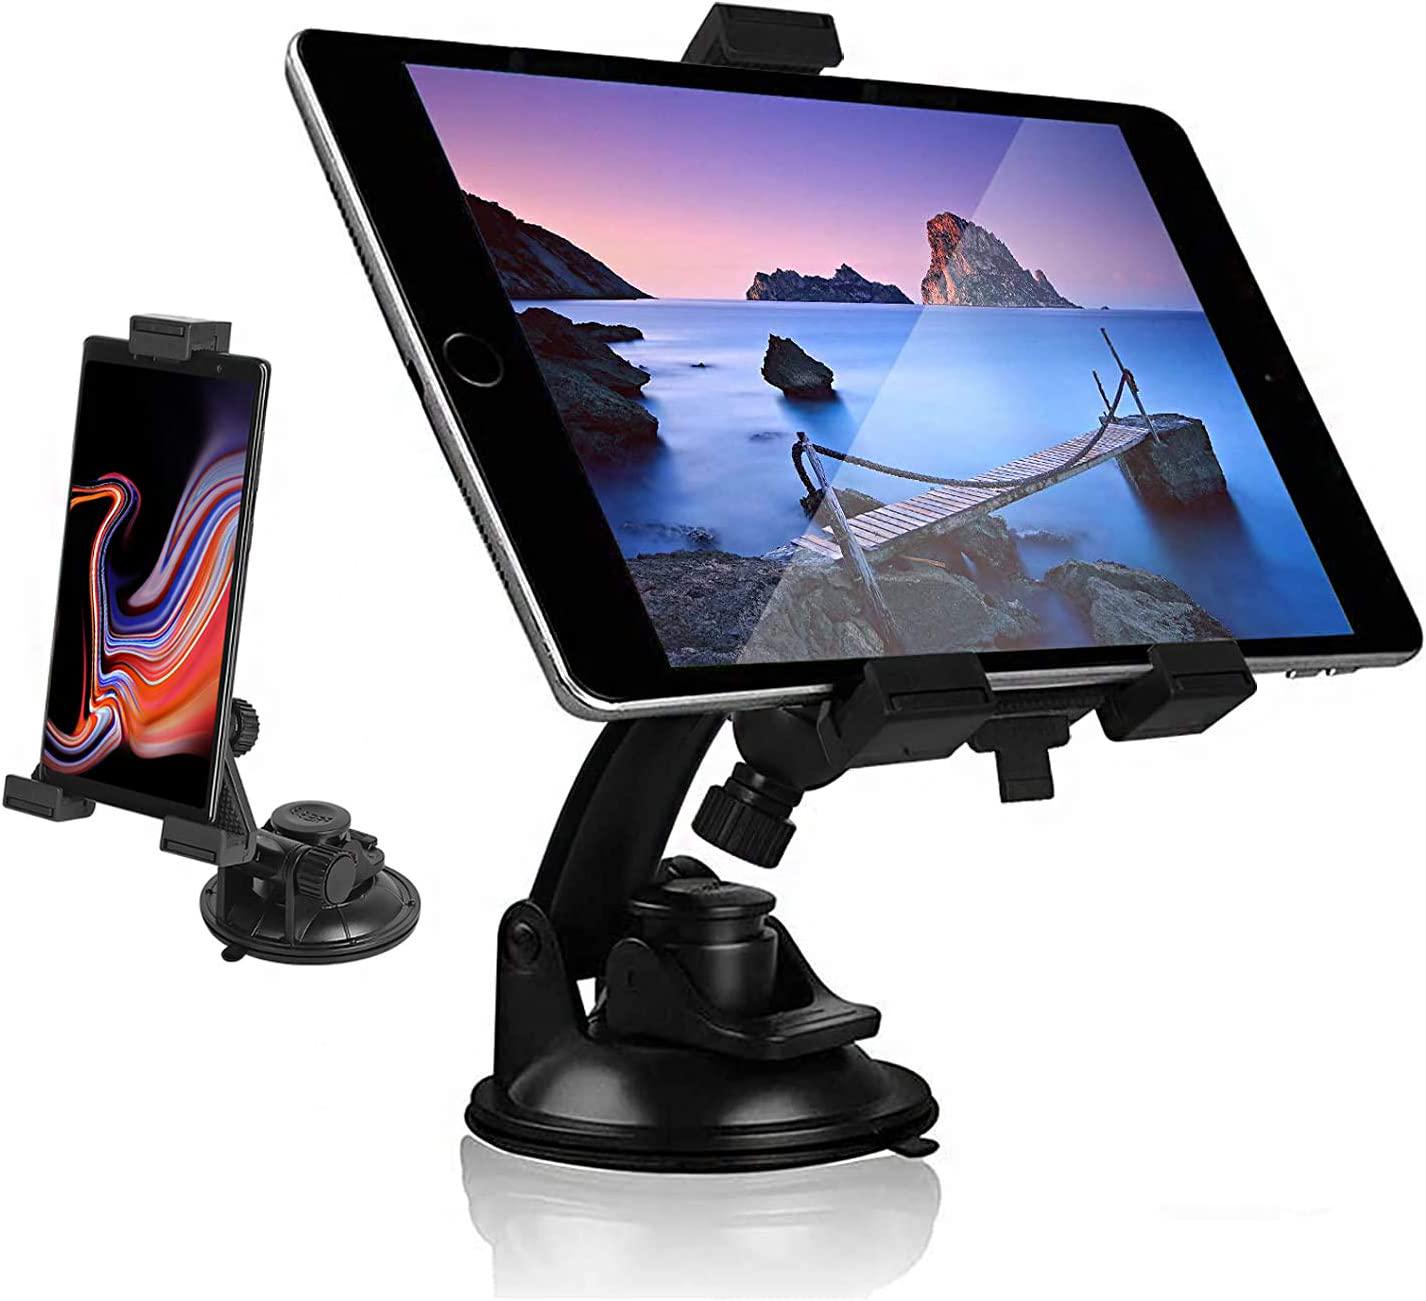 Linkstyle, Linkstyle Universal Car Mount Tablet Holder, Dashboard Windshield Tablet Mount Phone Stand, 360° Rotation TPU Suction Cup Tablet Cradles for iPad Pro Mini Air iPhone Samsung Galaxy Tab 4.7-10.5In